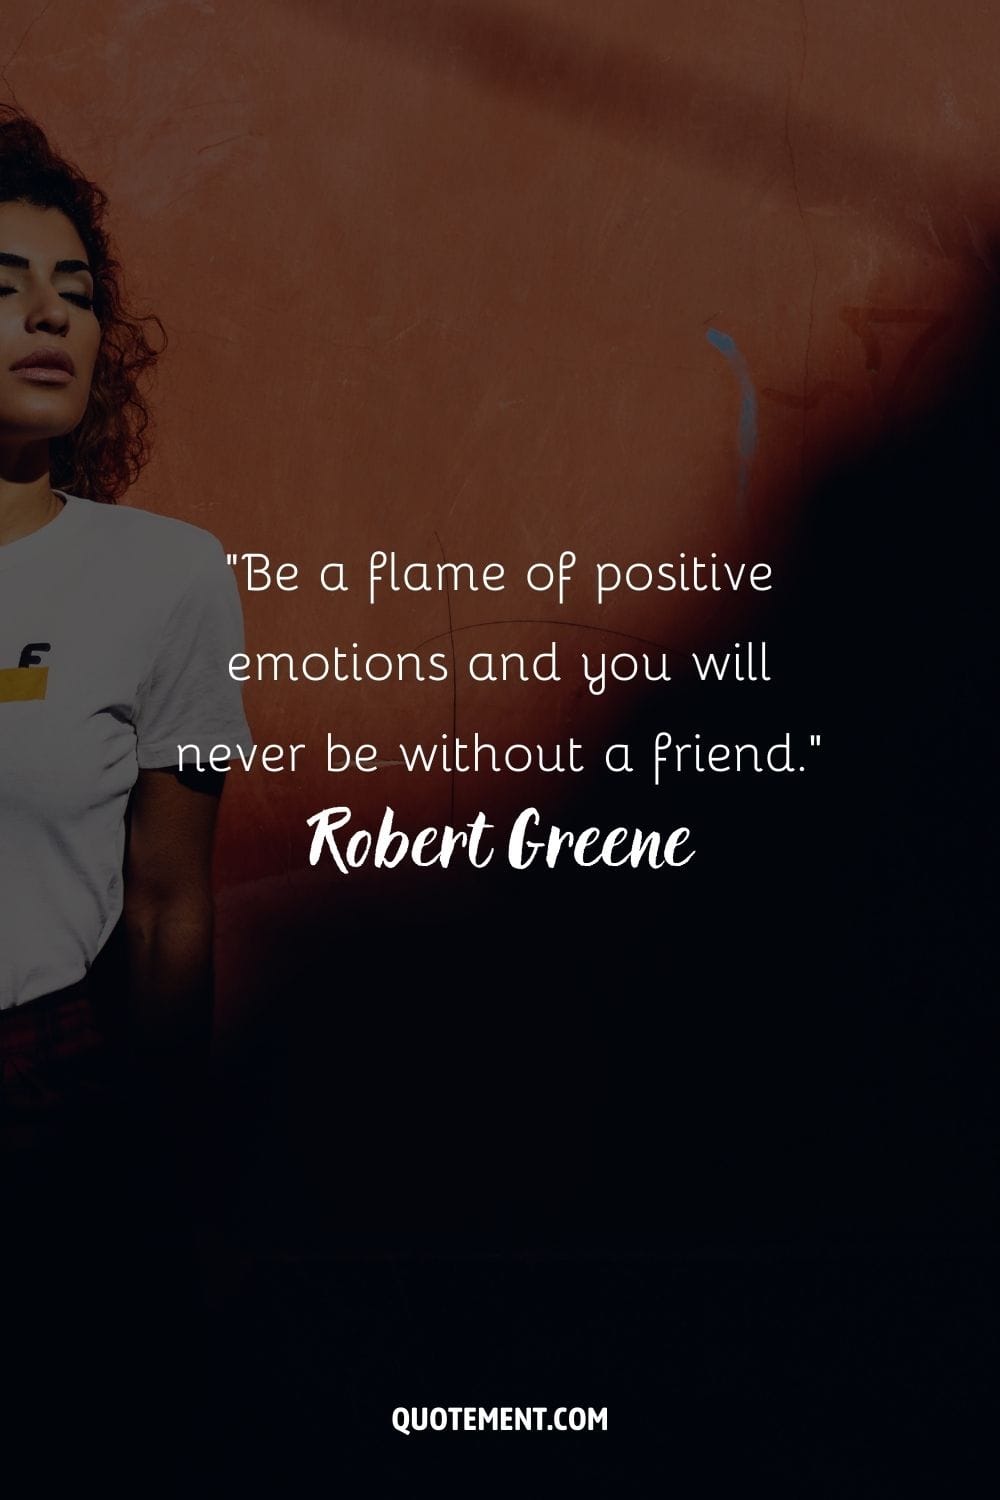 “Be a flame of positive emotions and you will never be without a friend.” ― Robert Greene, The 48 Laws of Power